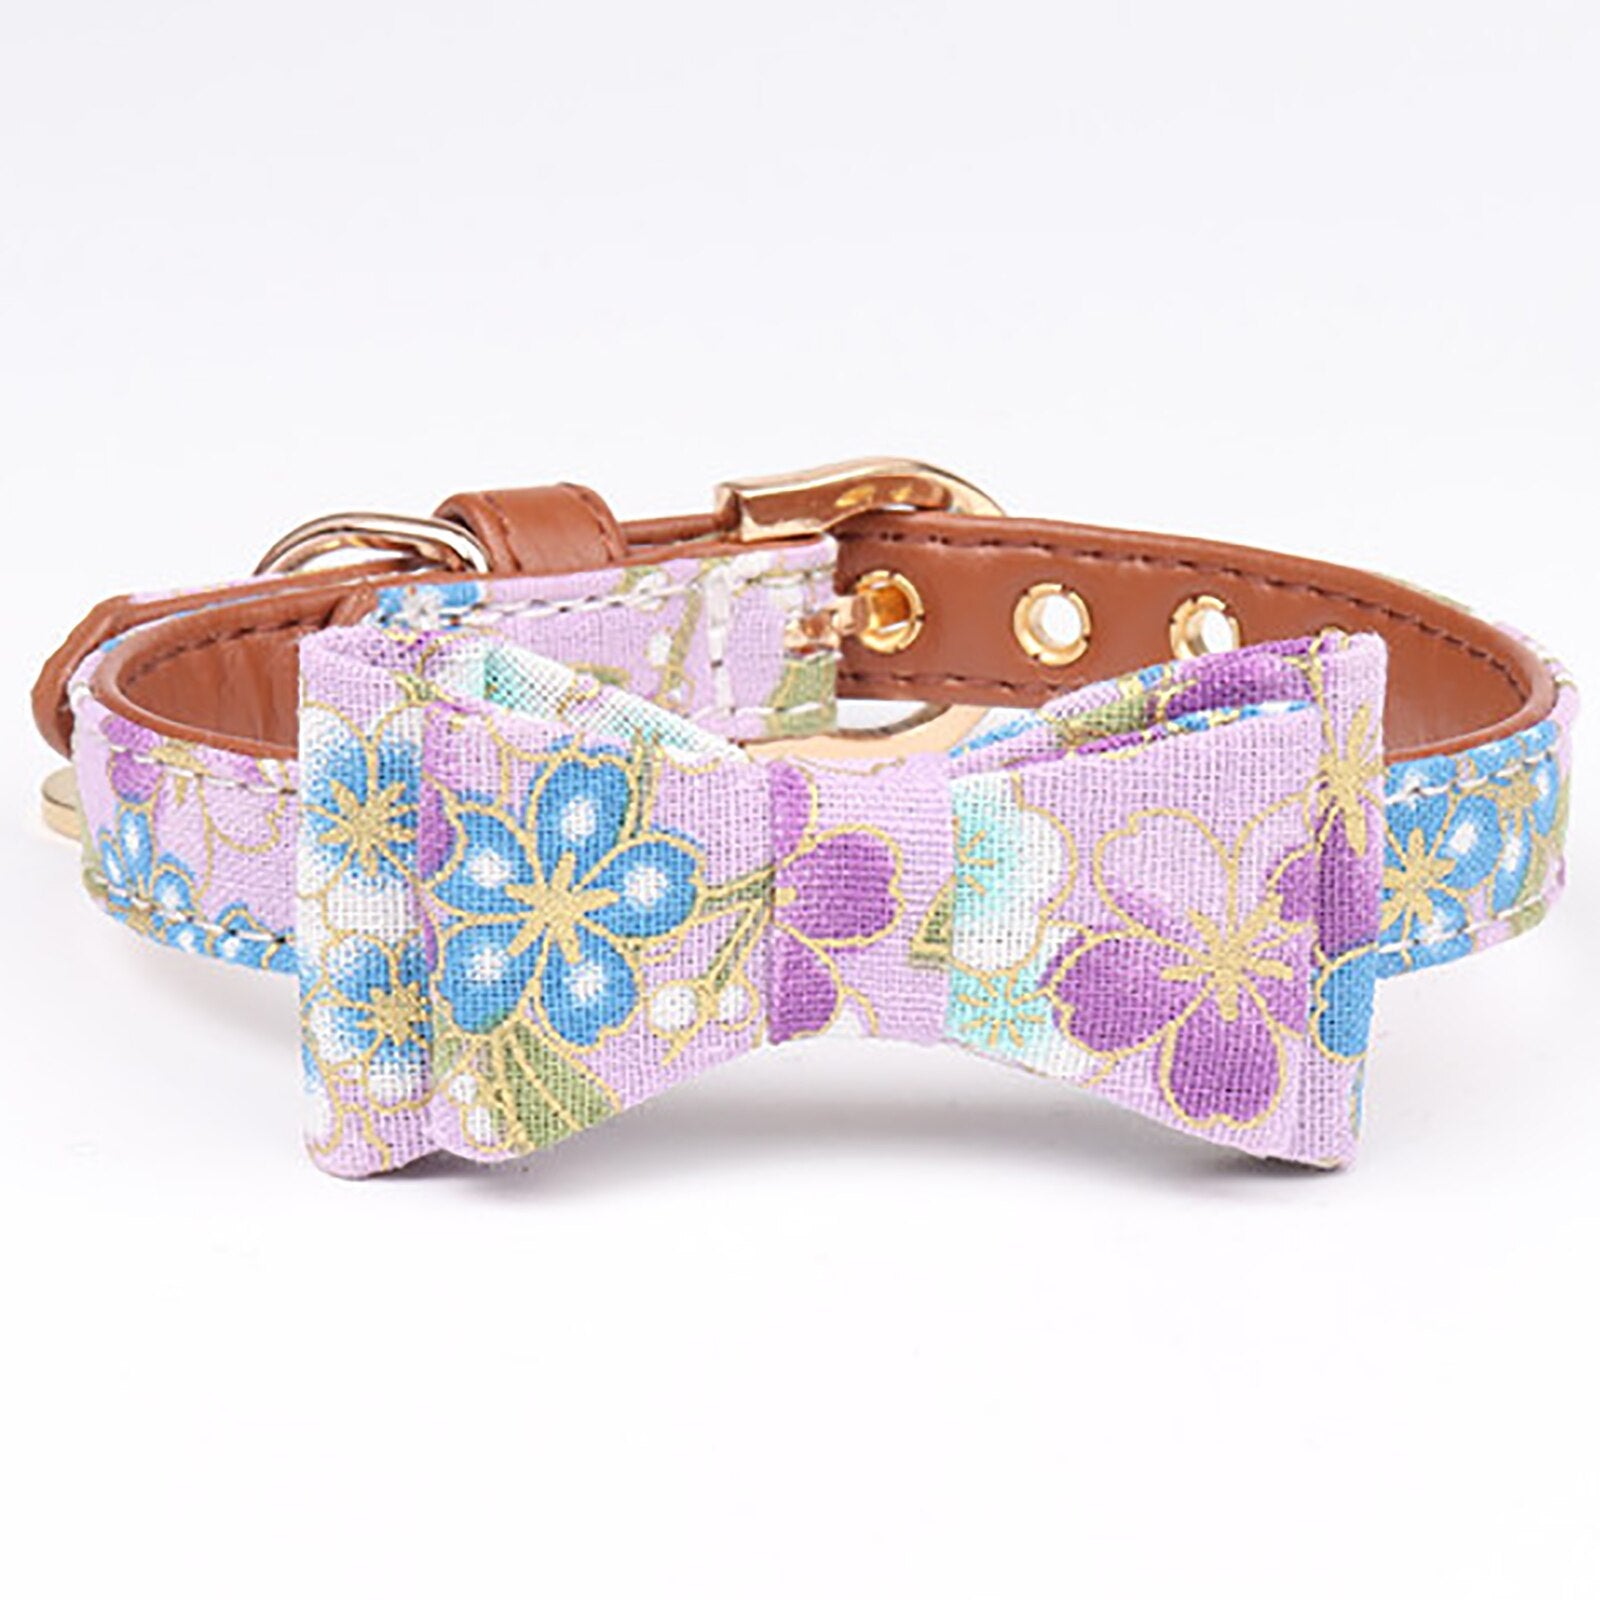 Adjustable Pet Dog Collar Floral Printed Cute Bow Dog Collar Necklace For Small Dog Pet Clothing Accessories Supplies-ebowsos